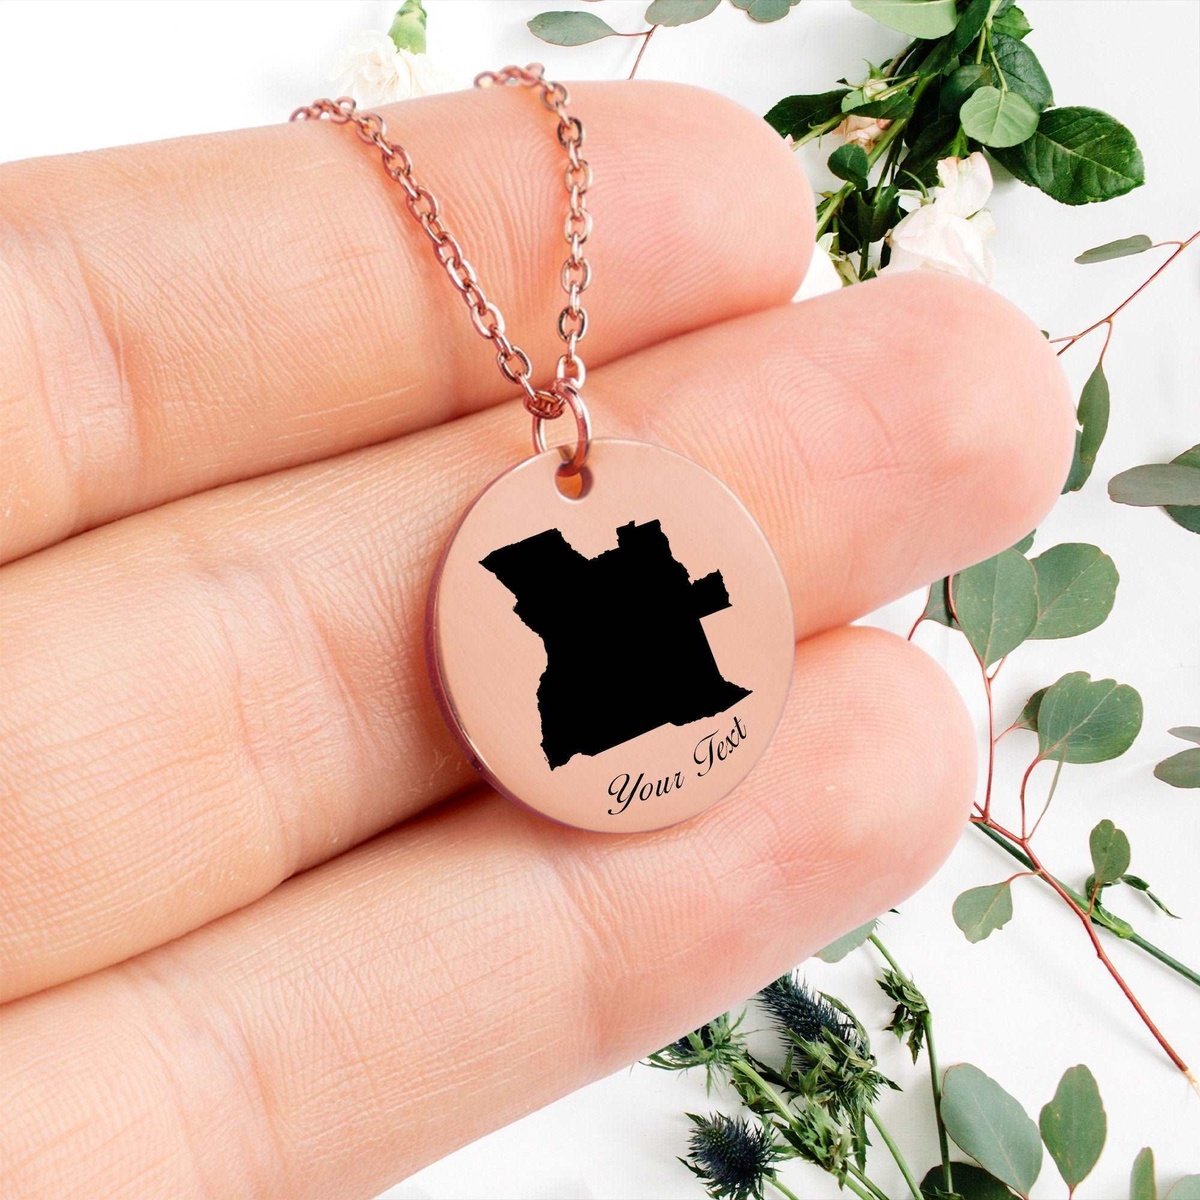 Angola Country Map Necklace, Your Name Necklace, Minimalist Necklace, Personalized Gift, Silver Necklace, Gift For Him Her